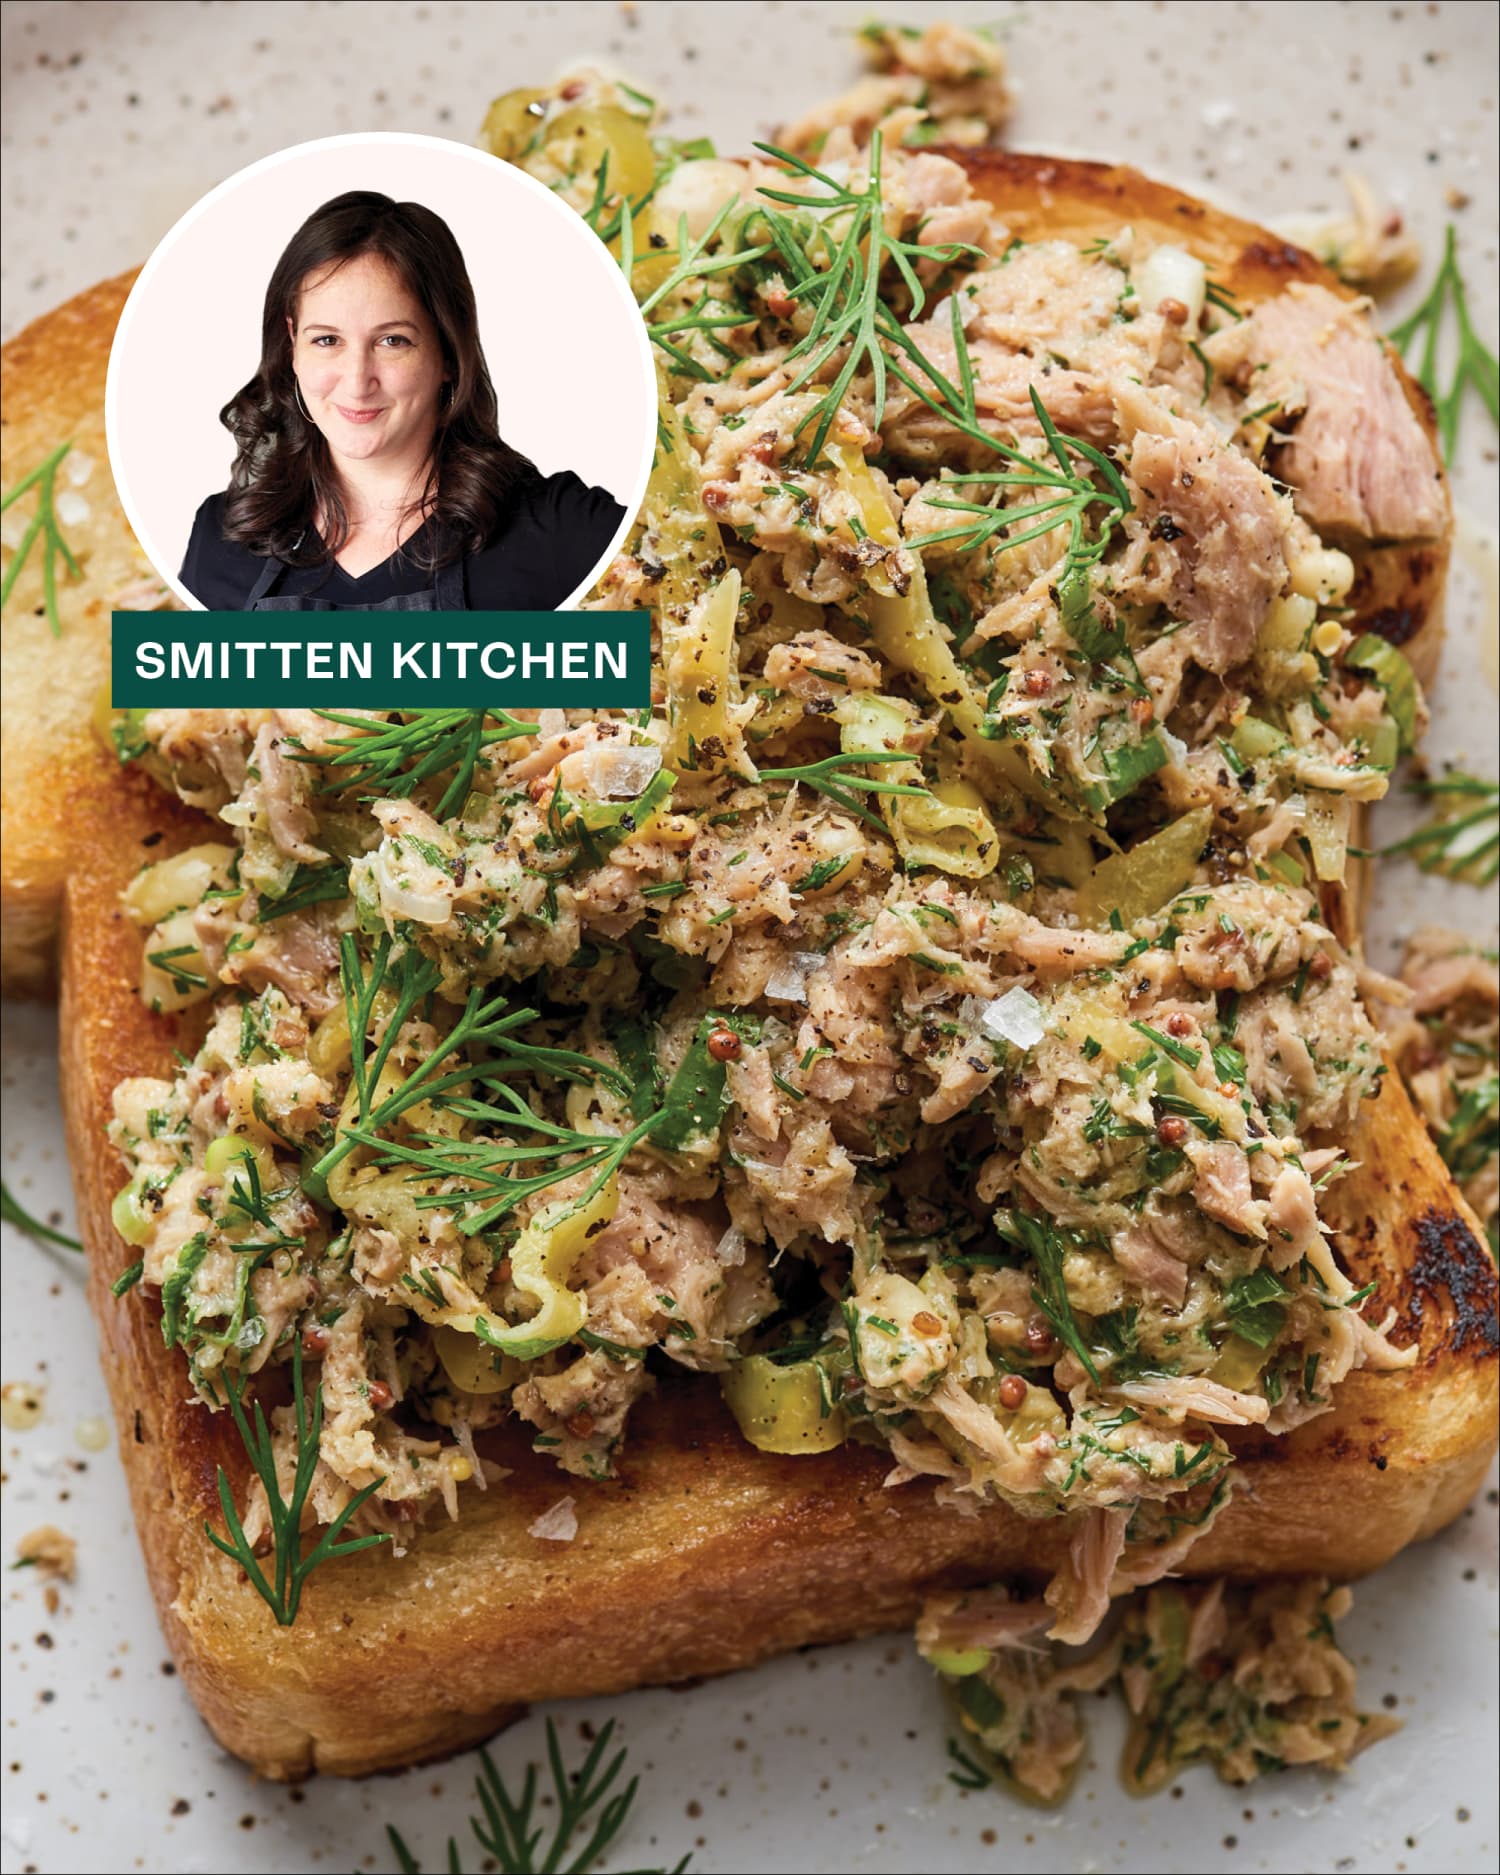 Smitten Kitchen's Tuna Salad Is for Folks Who Love Mix-ins, but Not Mayo